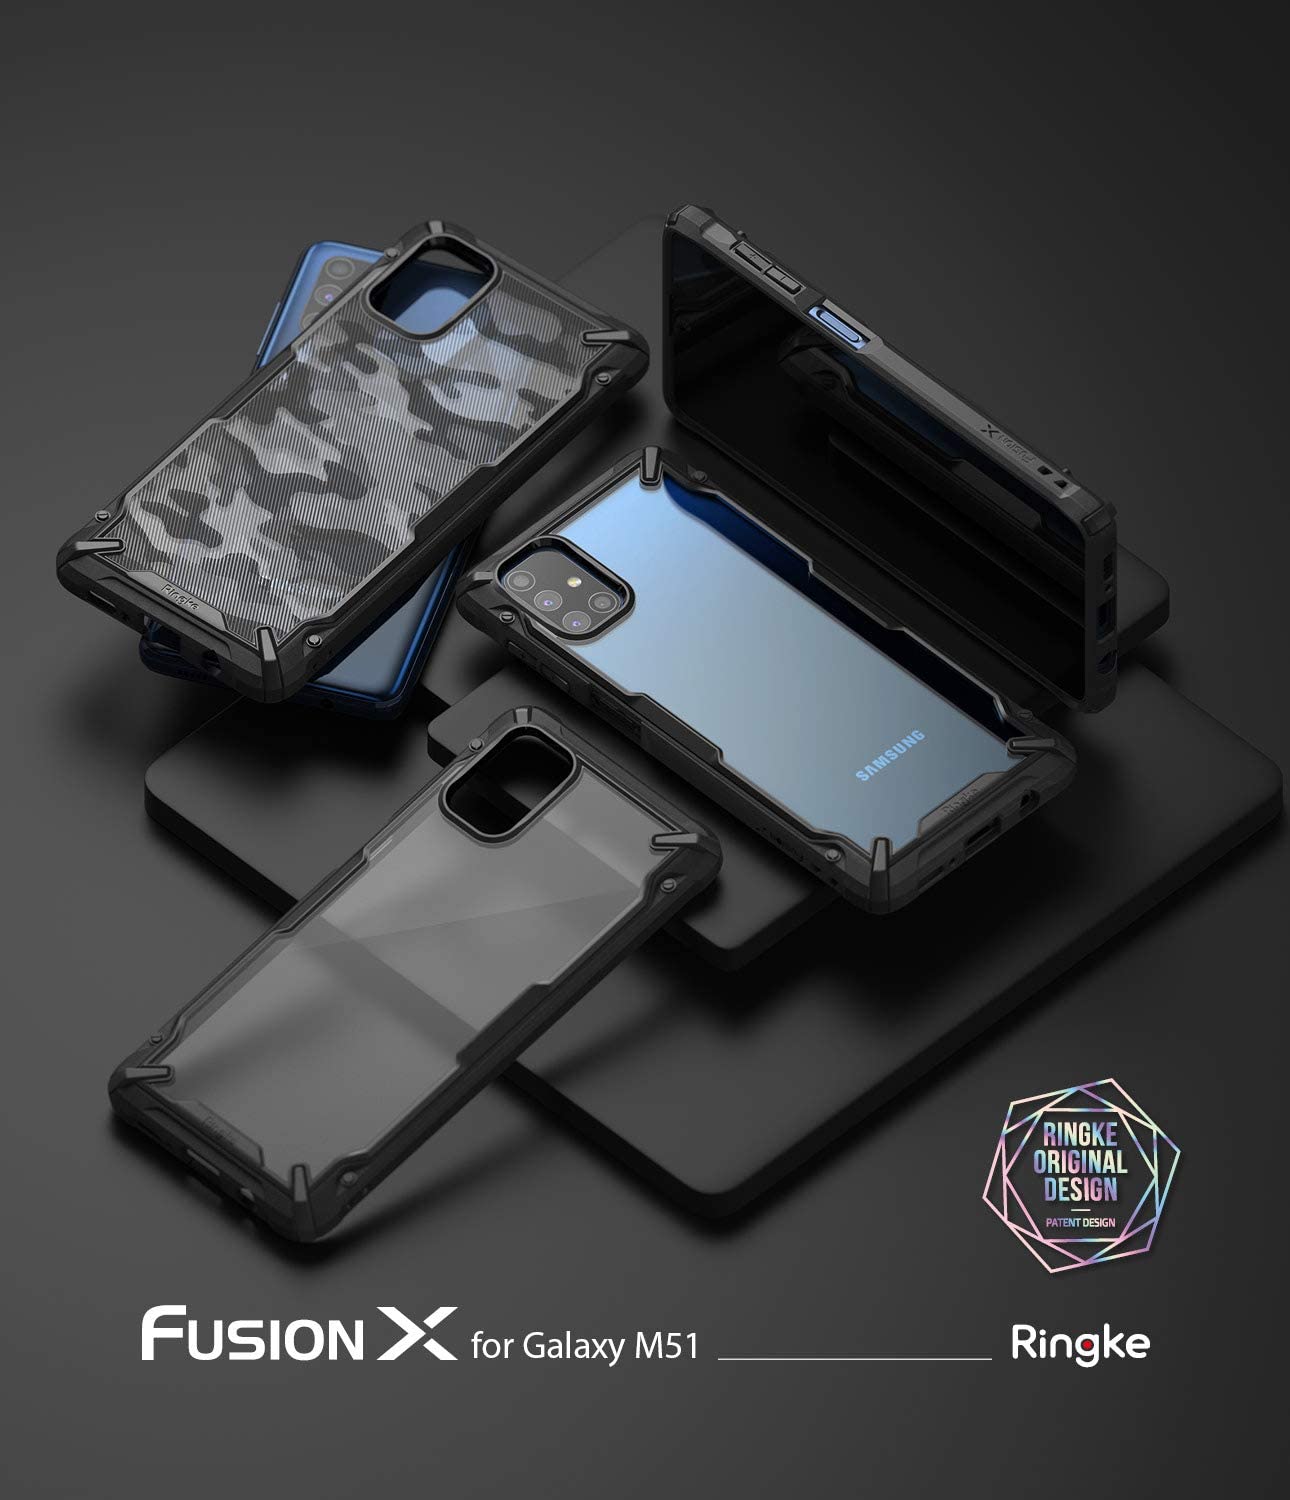 Ringke Fusion-X Galaxy M51 Military Drop Tested Ergonomic Transparent PC TPU Bumper Impact Resistant Protection Back Case Cover